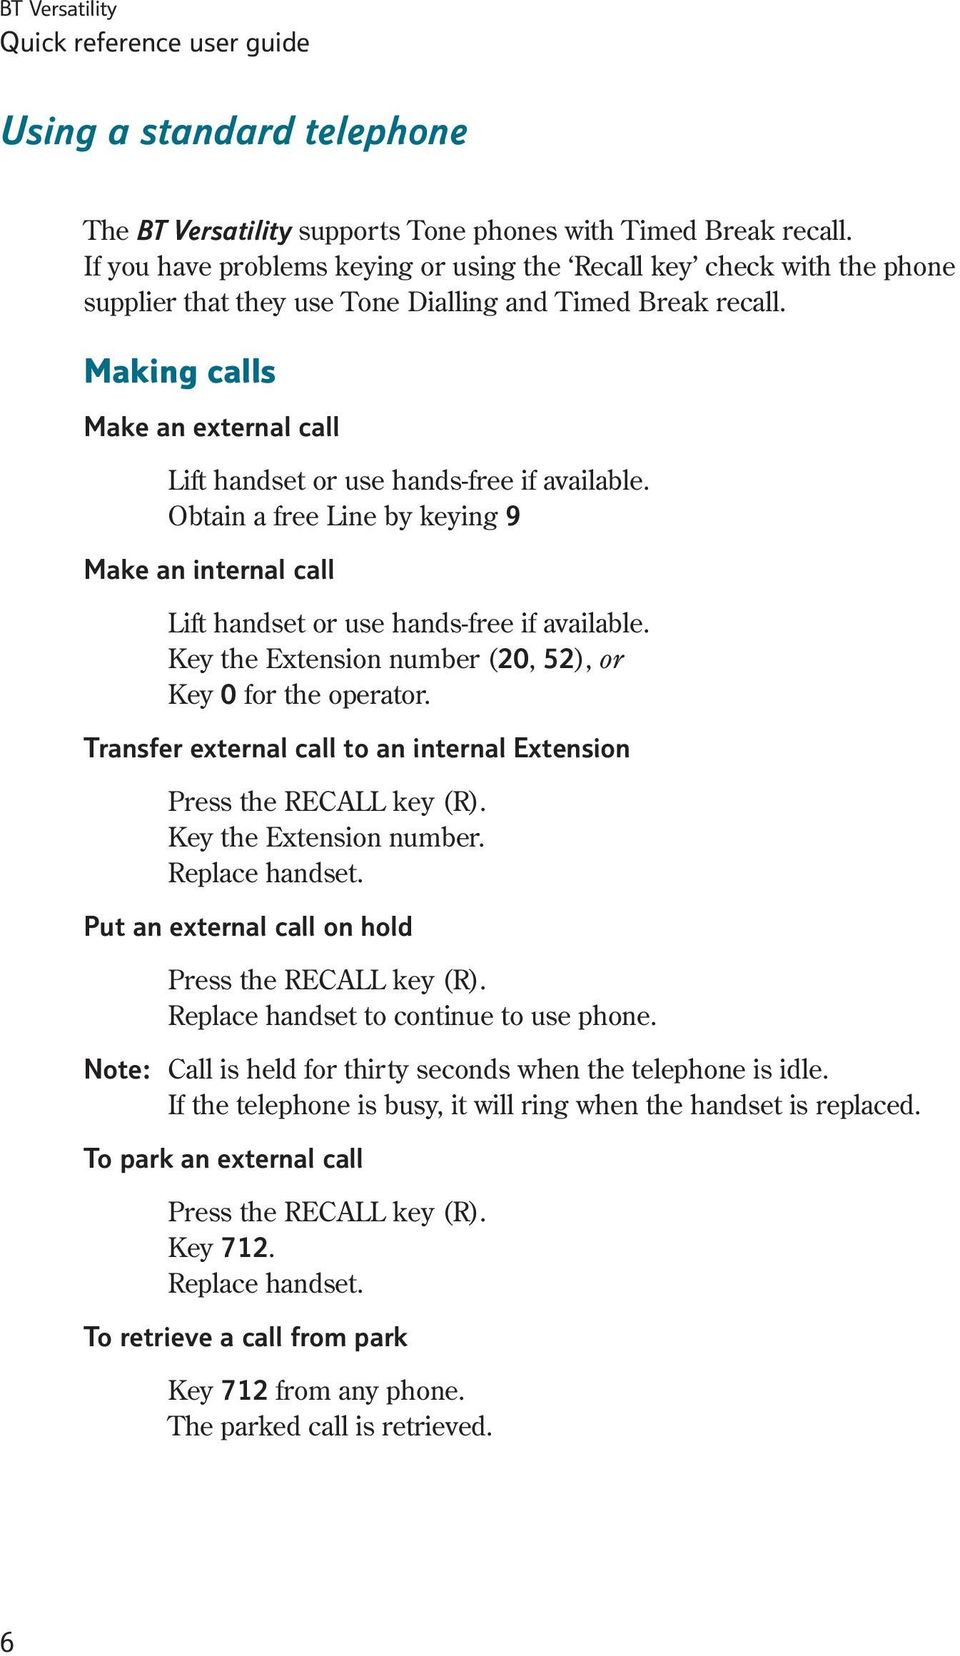 Obtain a free Line by keying 9 Make an internal call. Key the Extension number (20, 52), or Key 0 for the operator. Transfer external call to an internal Extension Press the RECALL key (R).